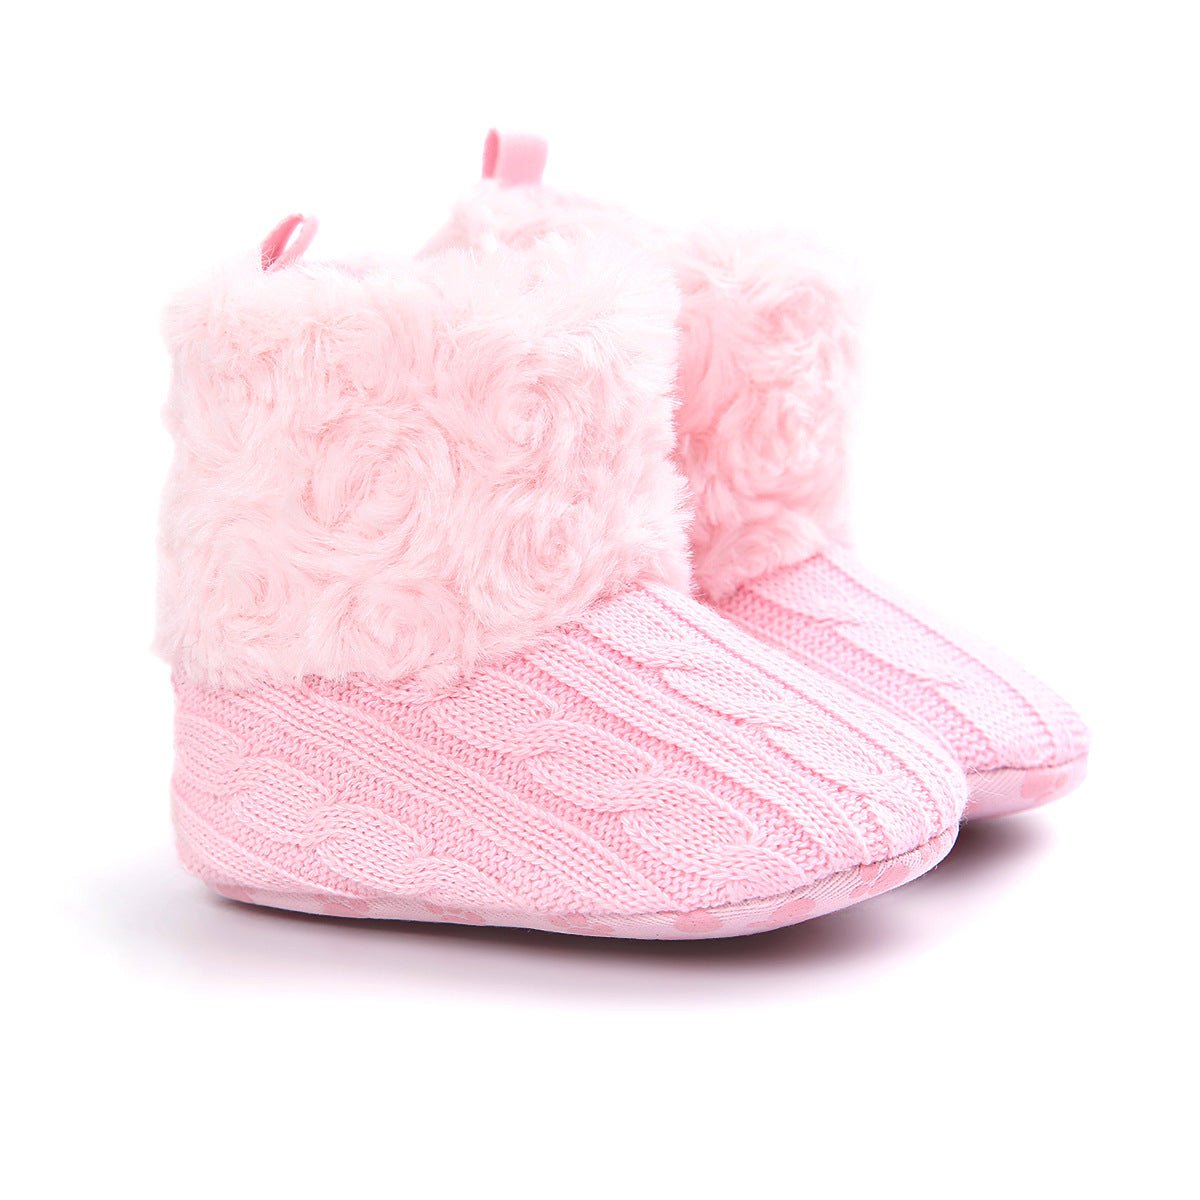 Baby knitted shoes - Baby Shoes -  Trend Goods